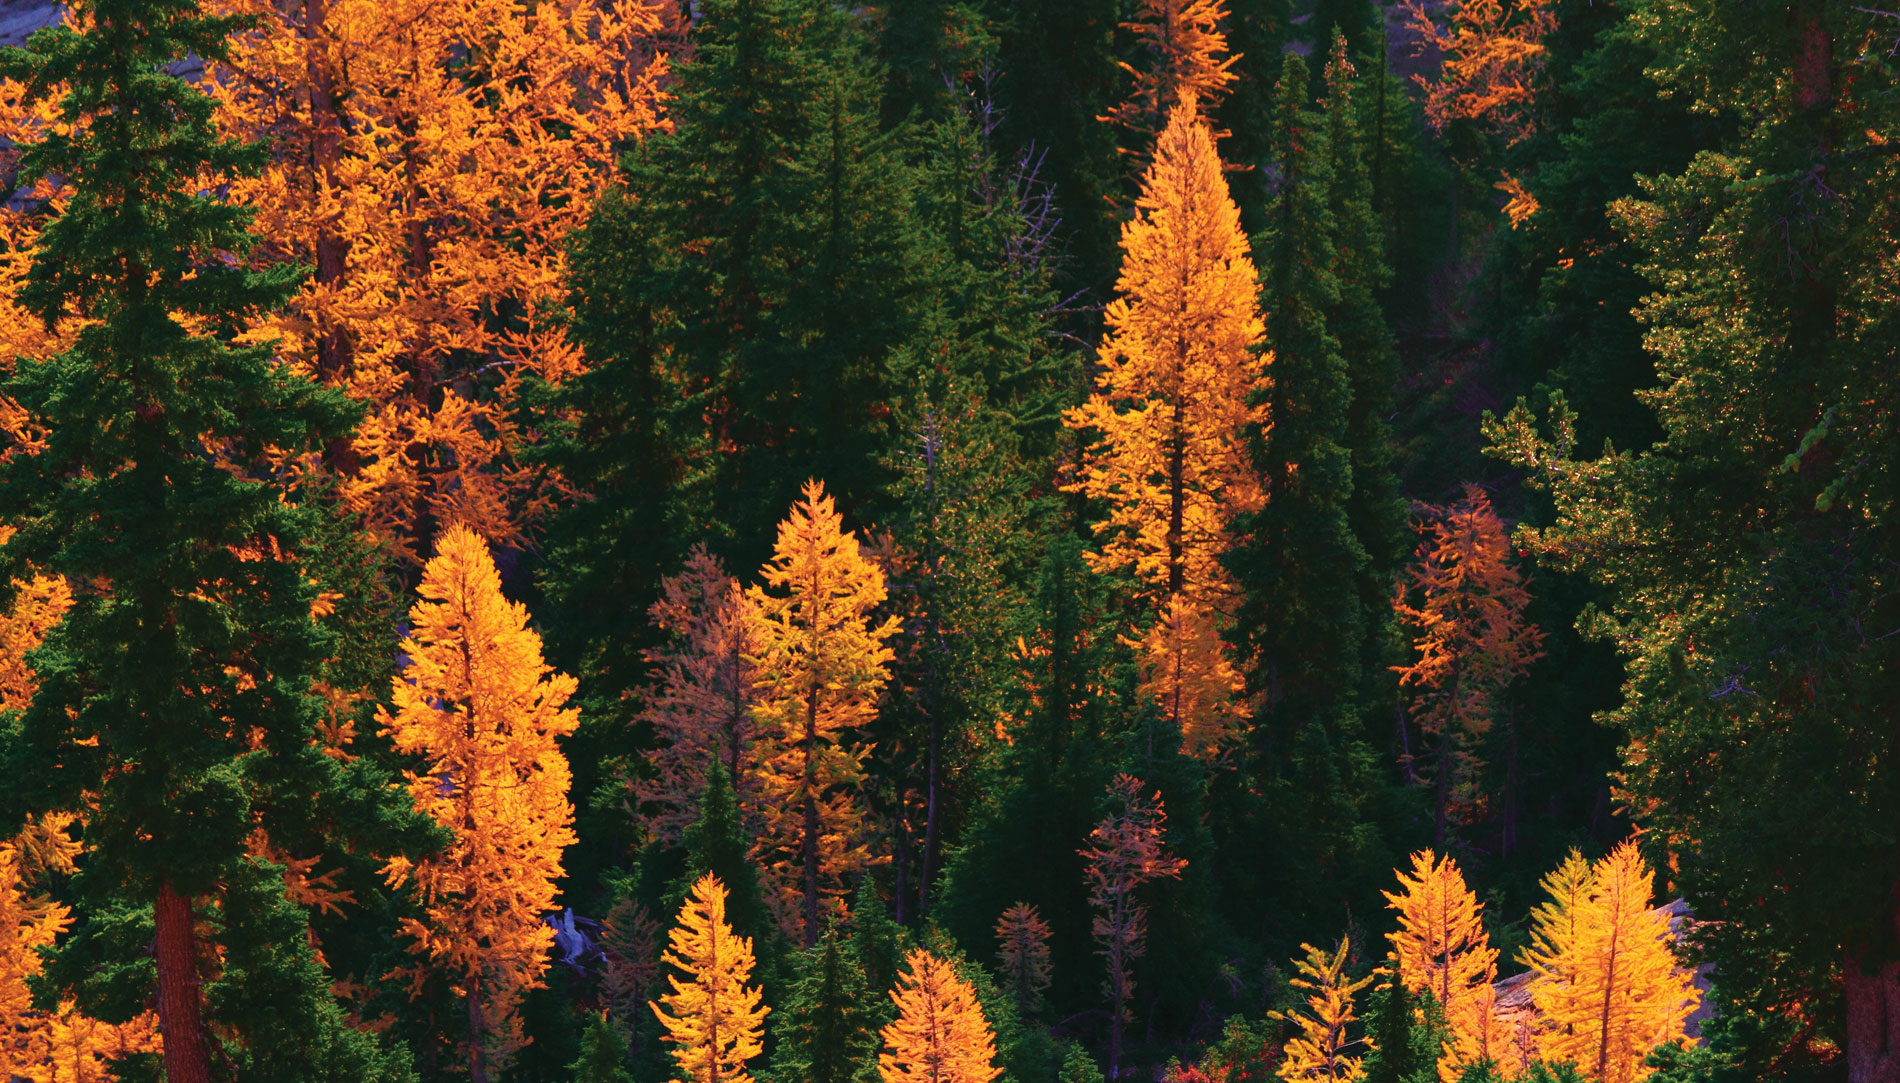 Gold larches